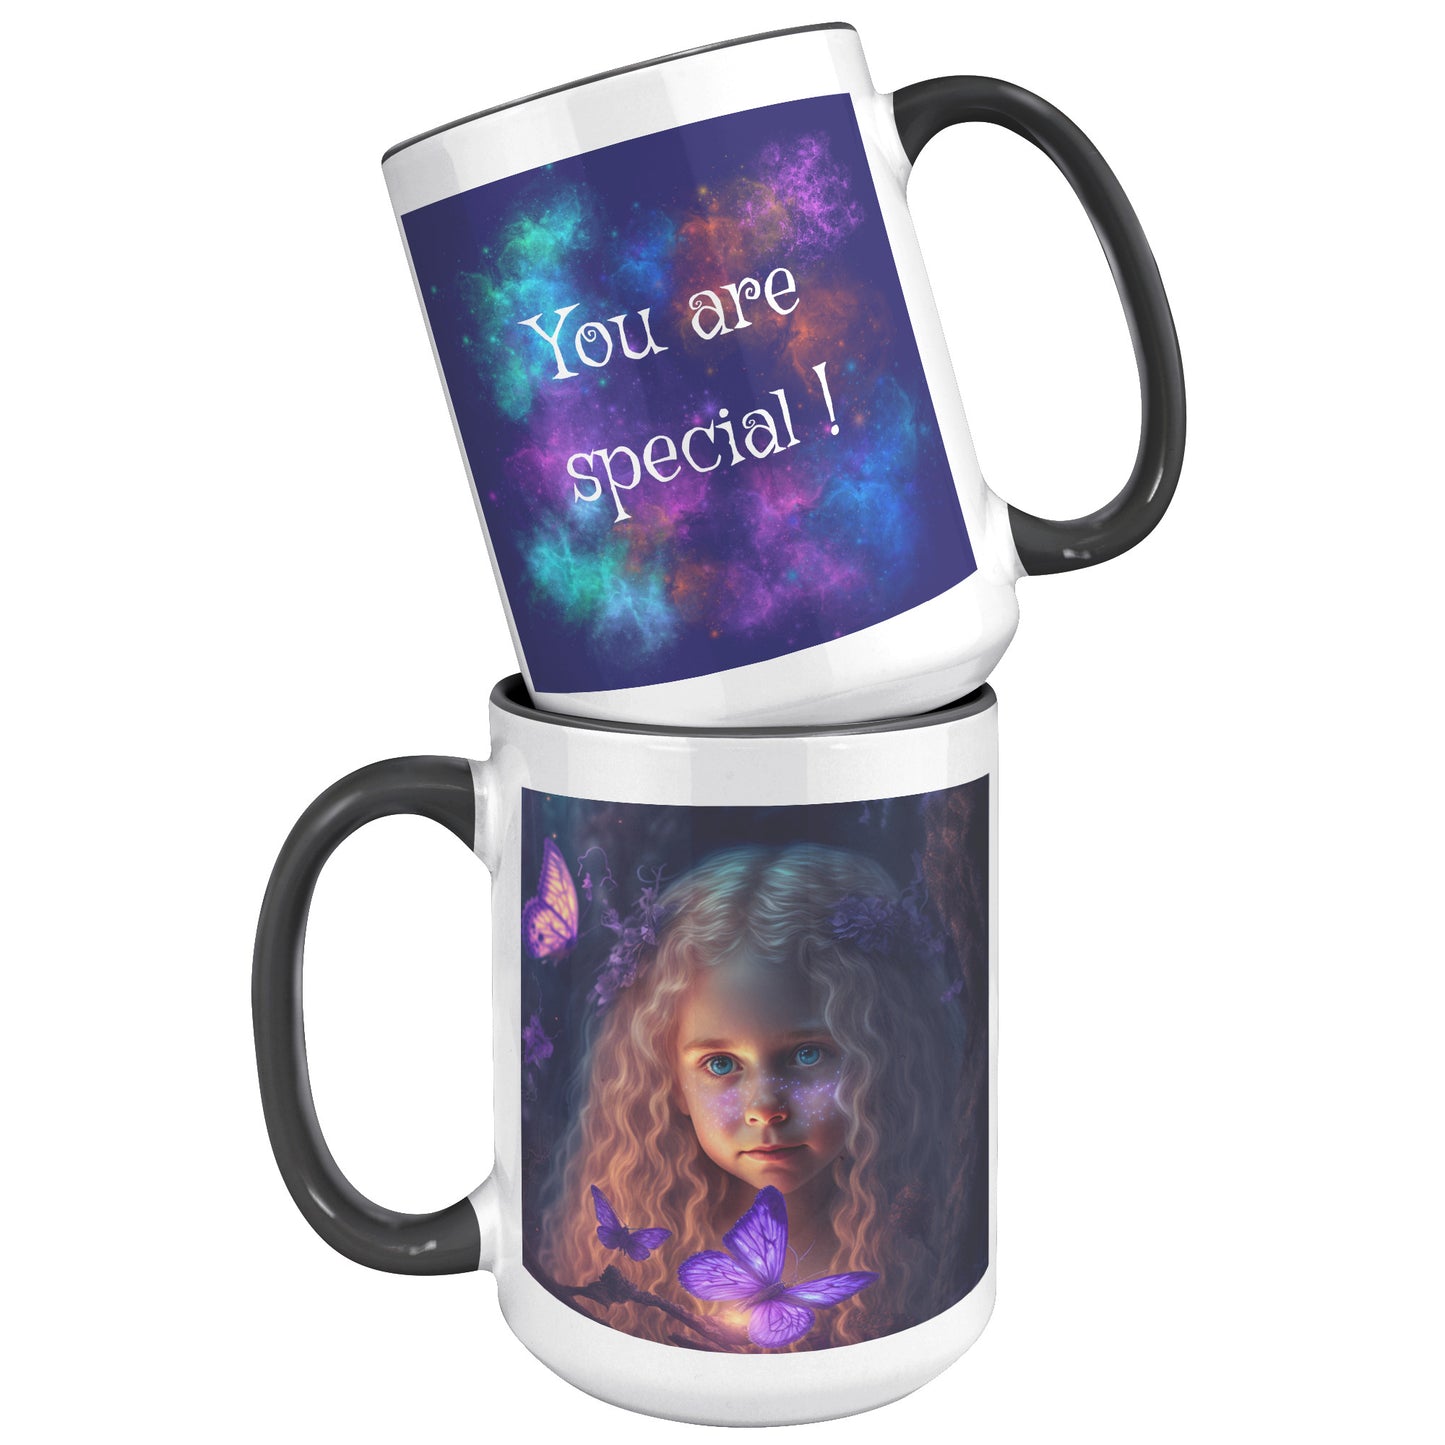 Mug 15oz - Lucy and the Enchanted Forest 4